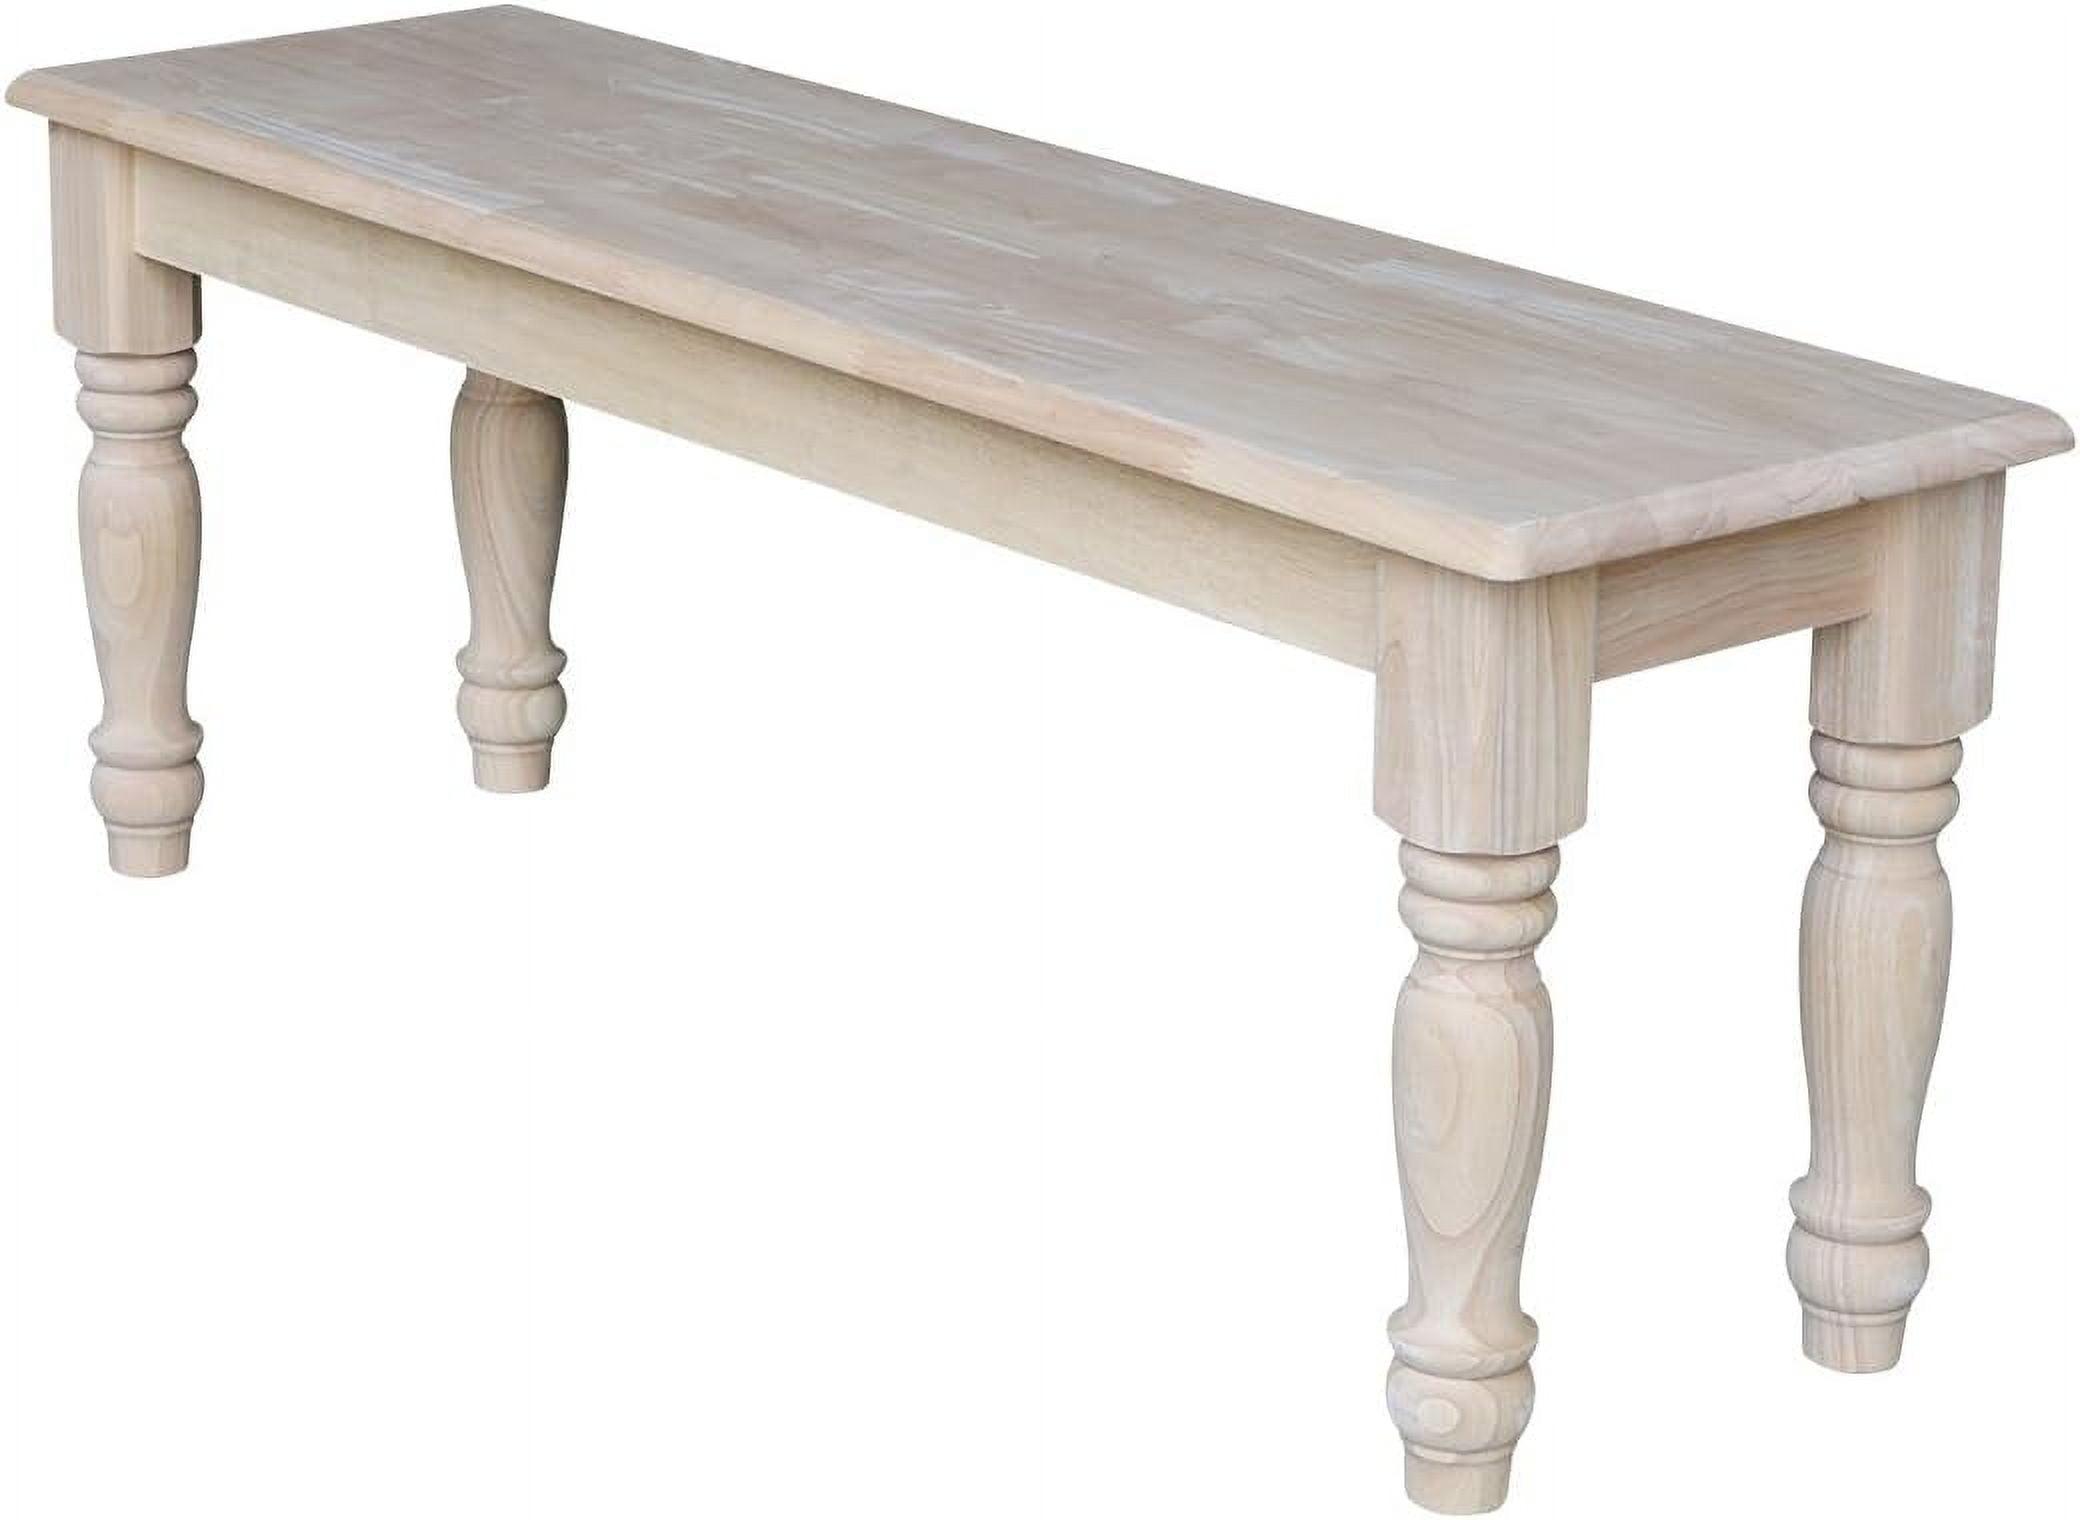 Rustic Farmhouse Solid Pine Dining Bench - Unfinished